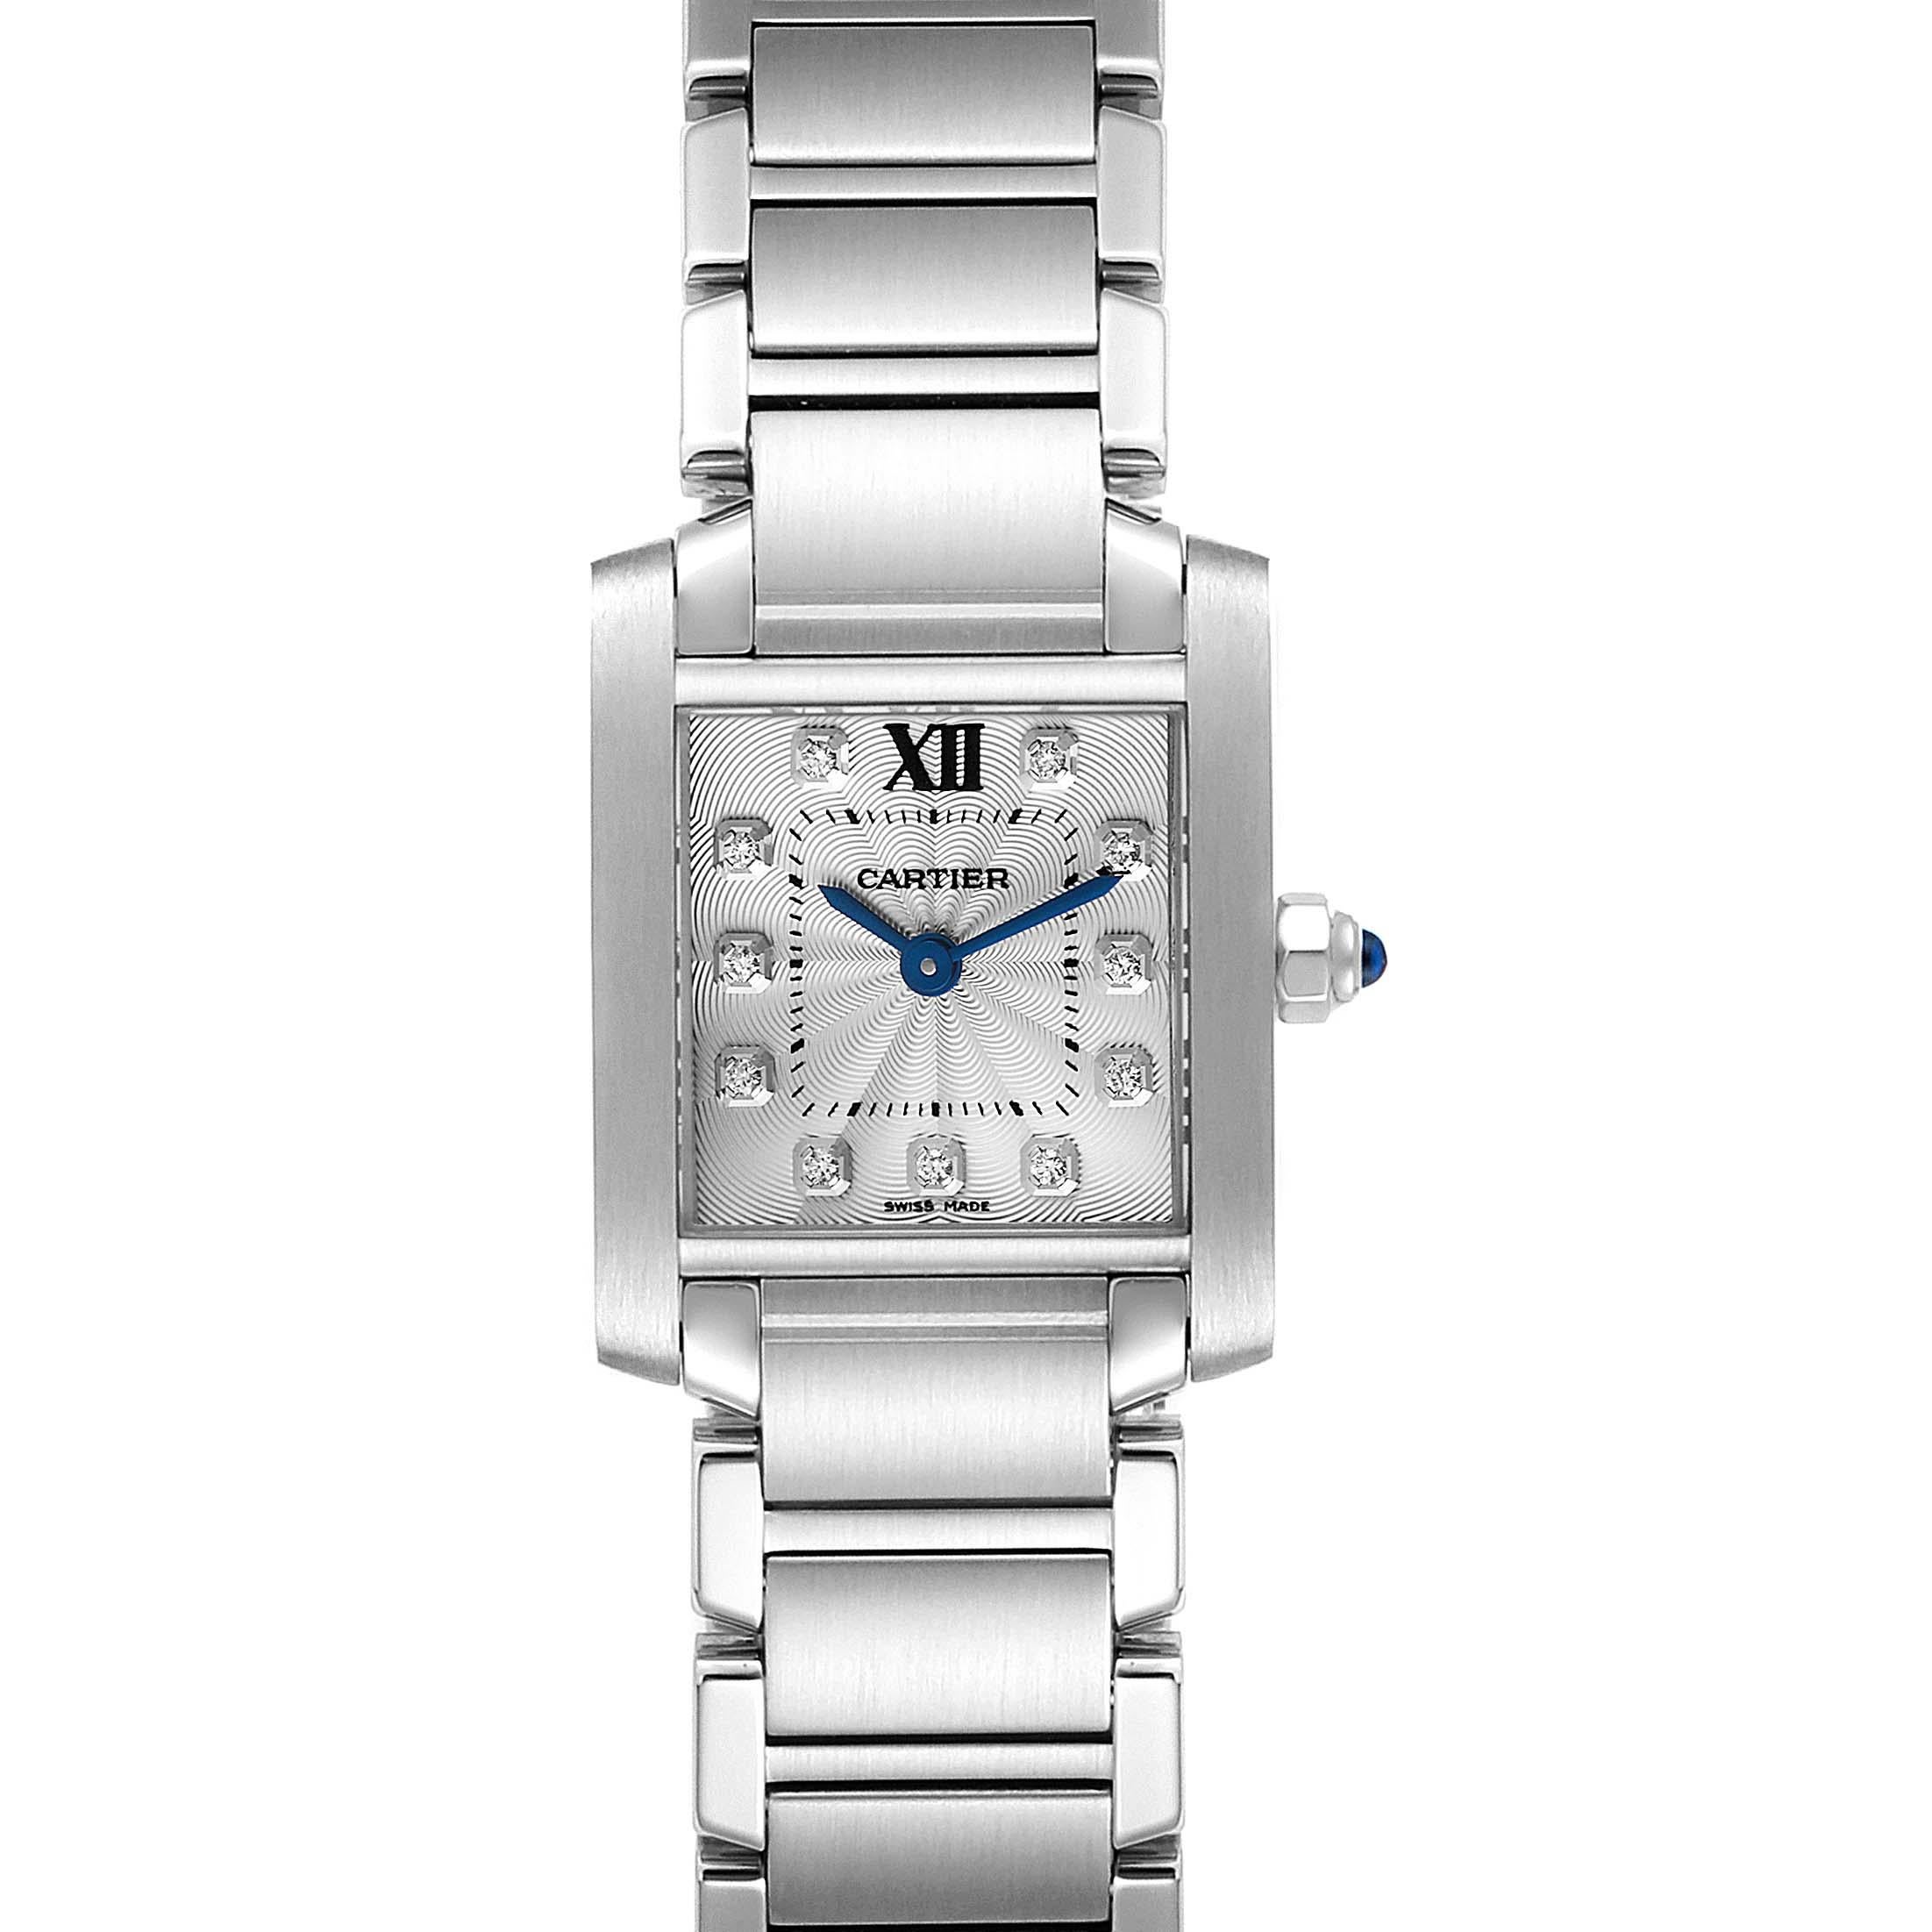 Cartier Tank Francaise Steel Diamond Small Ladies Watch WE110006. Quartz movement. Rectangular stainless steel 20 x 25 mm case. Octagonal crown set with a blue spinel cabochon. . Scratch resistant sapphire crystal. Silver guilloche dial with diamond